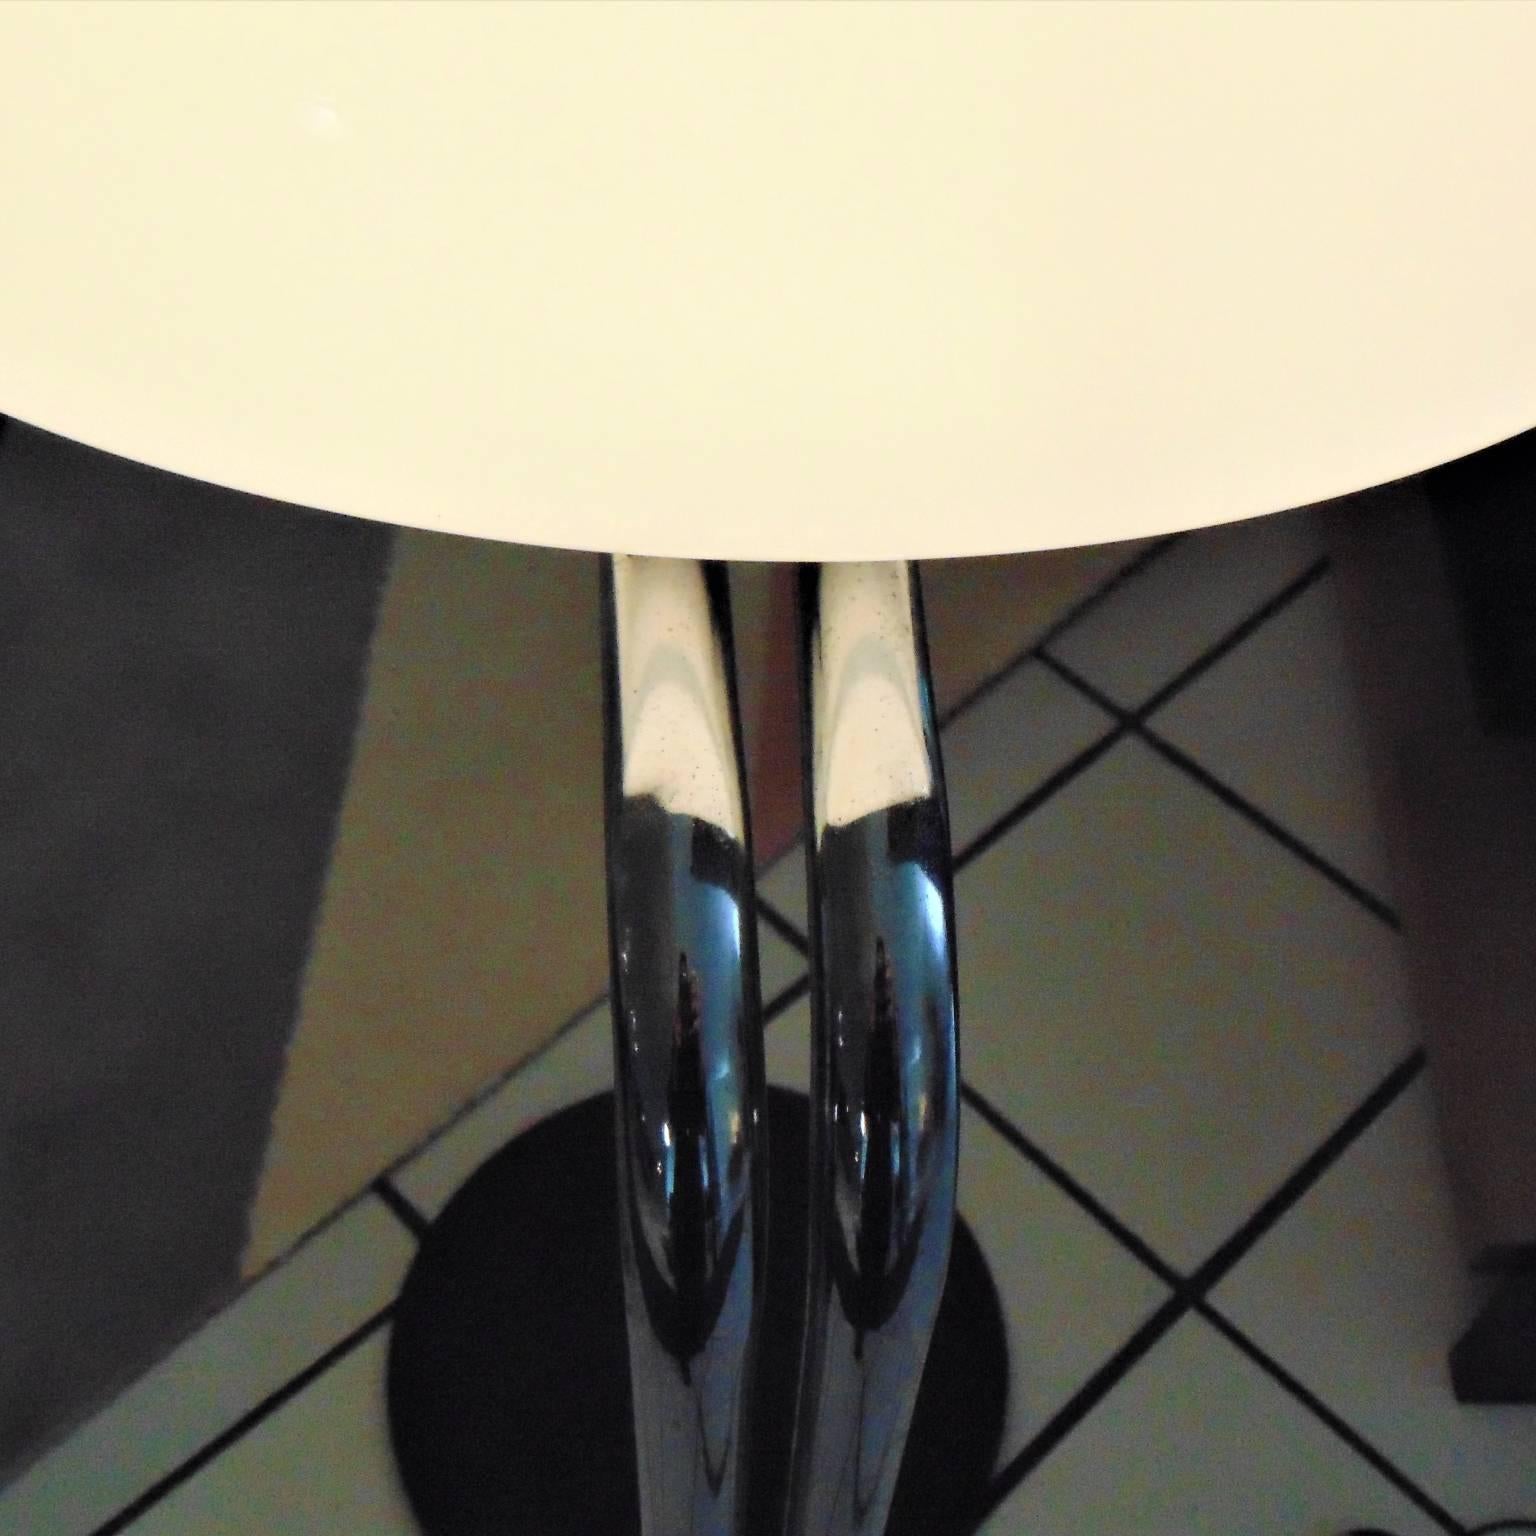 1972 Floor Lamp Opaline White Glass, Steel, Black Base by Sormani Nucleo, Italy For Sale 8